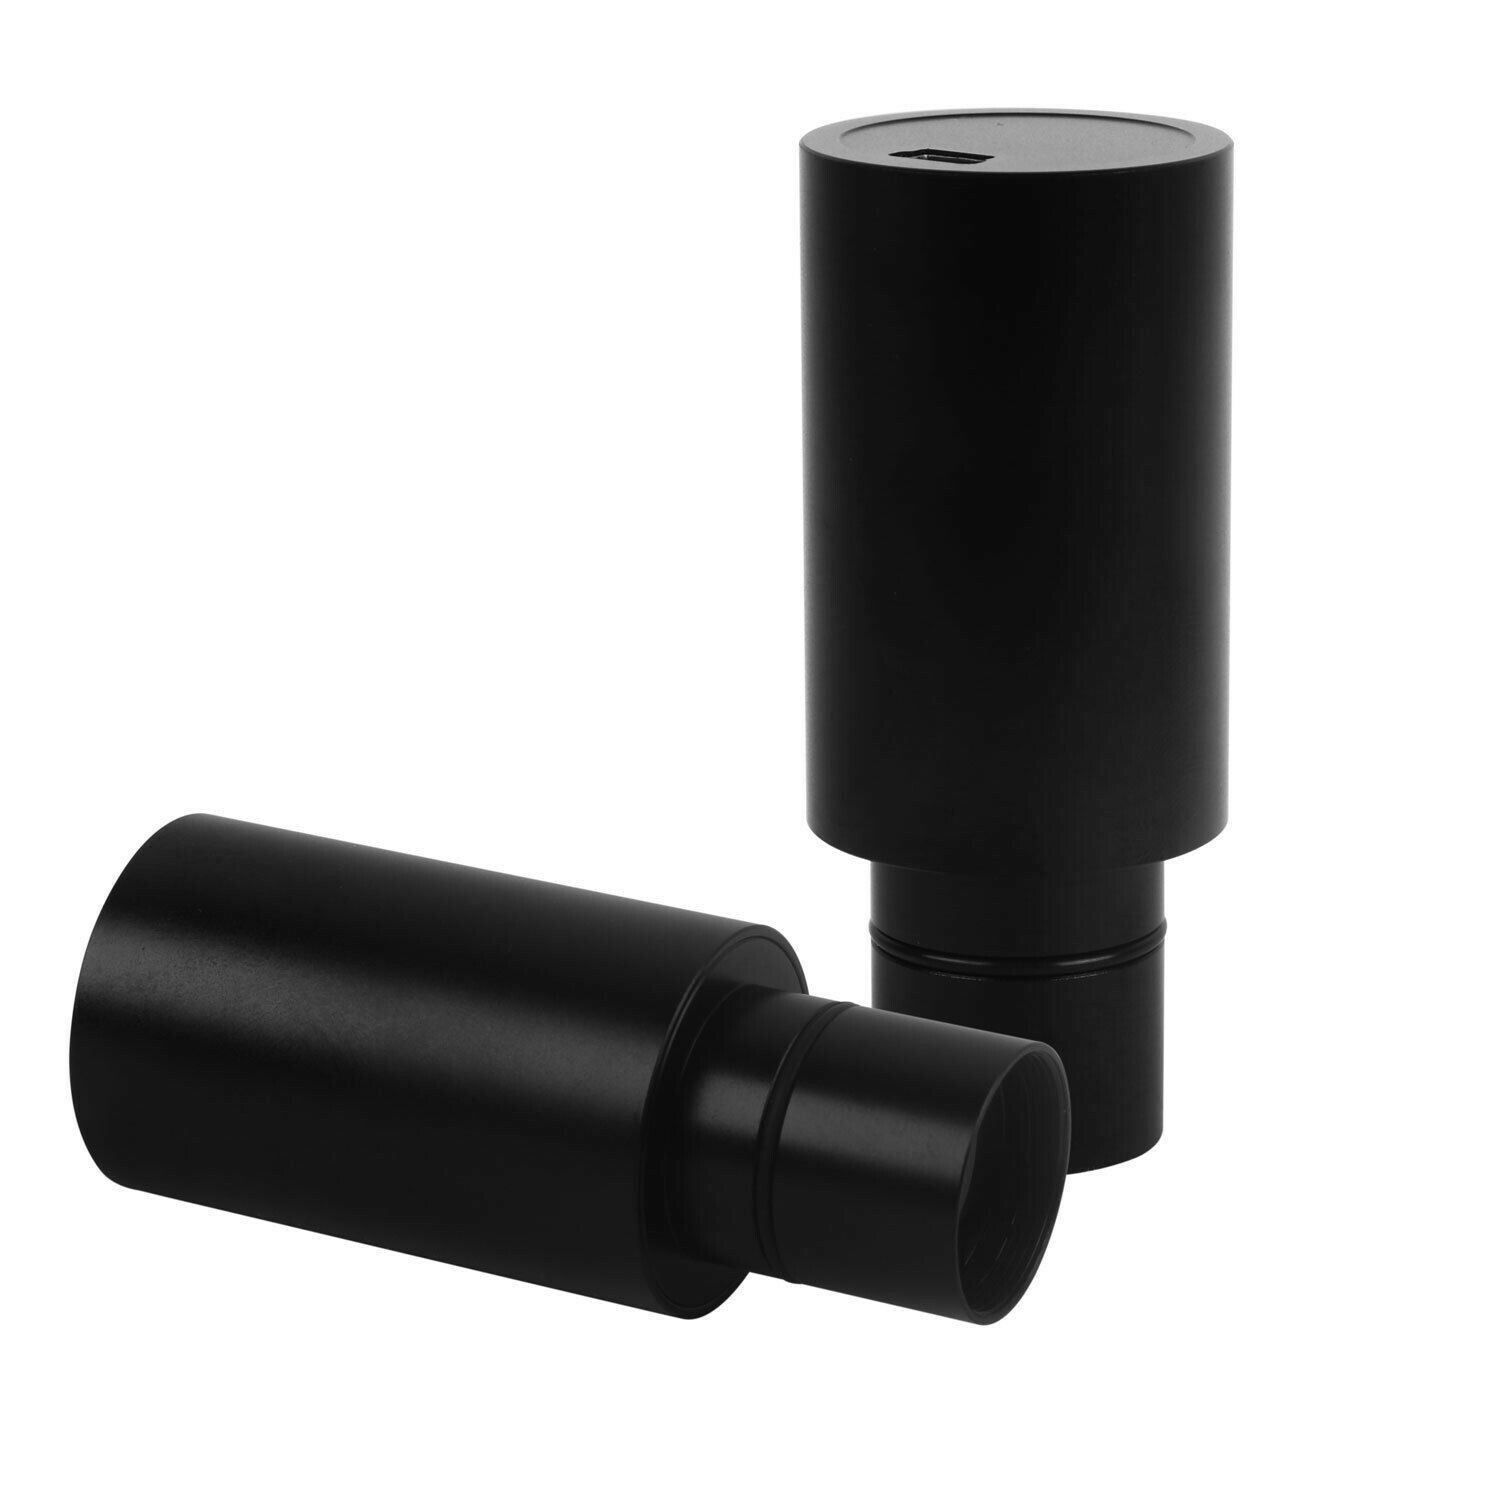 2MP Eyepiece Camera with Built-In Reduction Lens for Microscopes